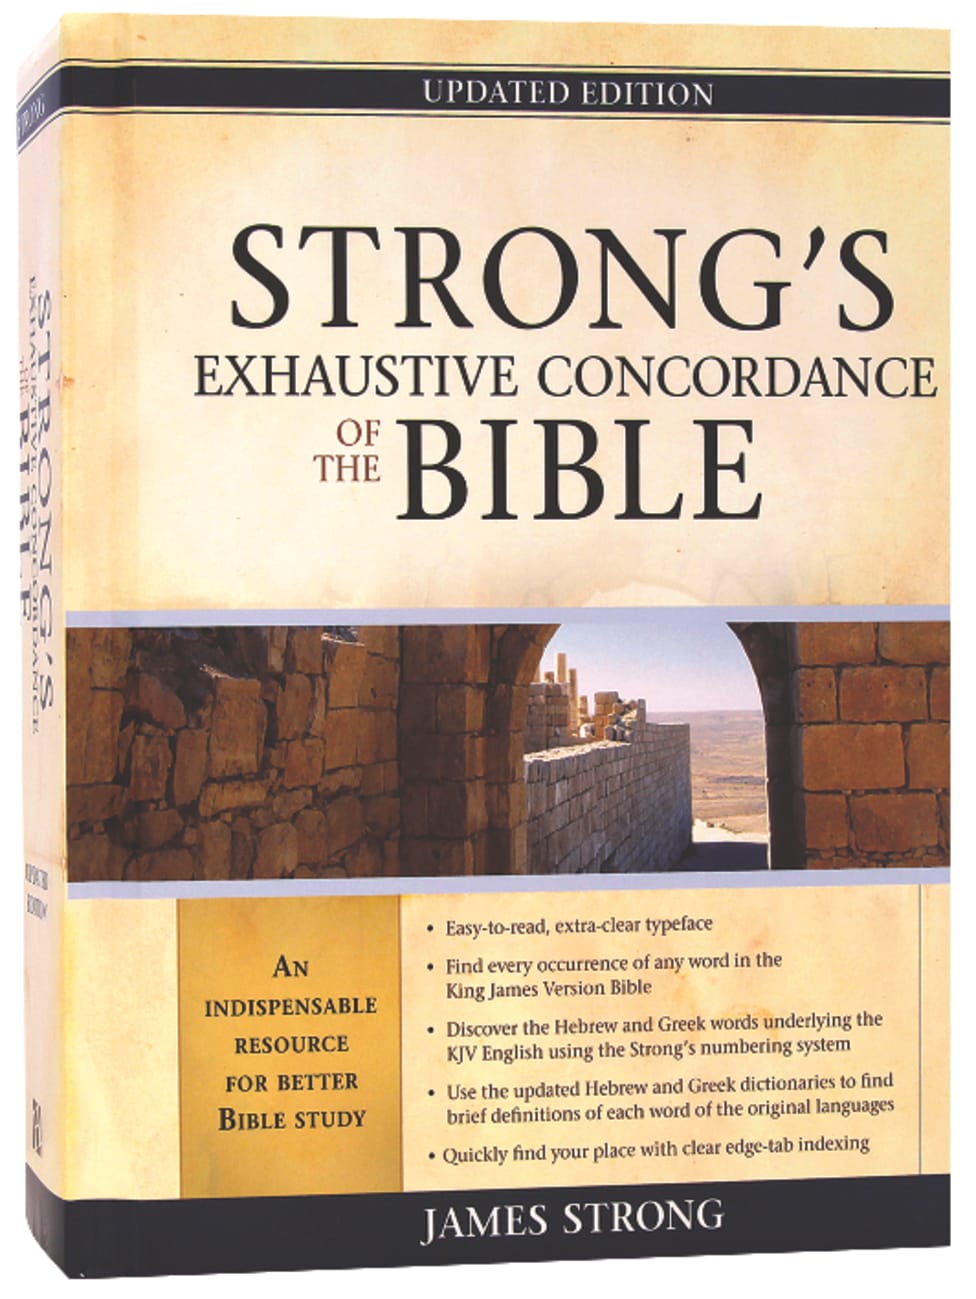 STRONG'S EXHAUSTIVE CONCORDANCE OF THE BIBLE (KJV BASED)